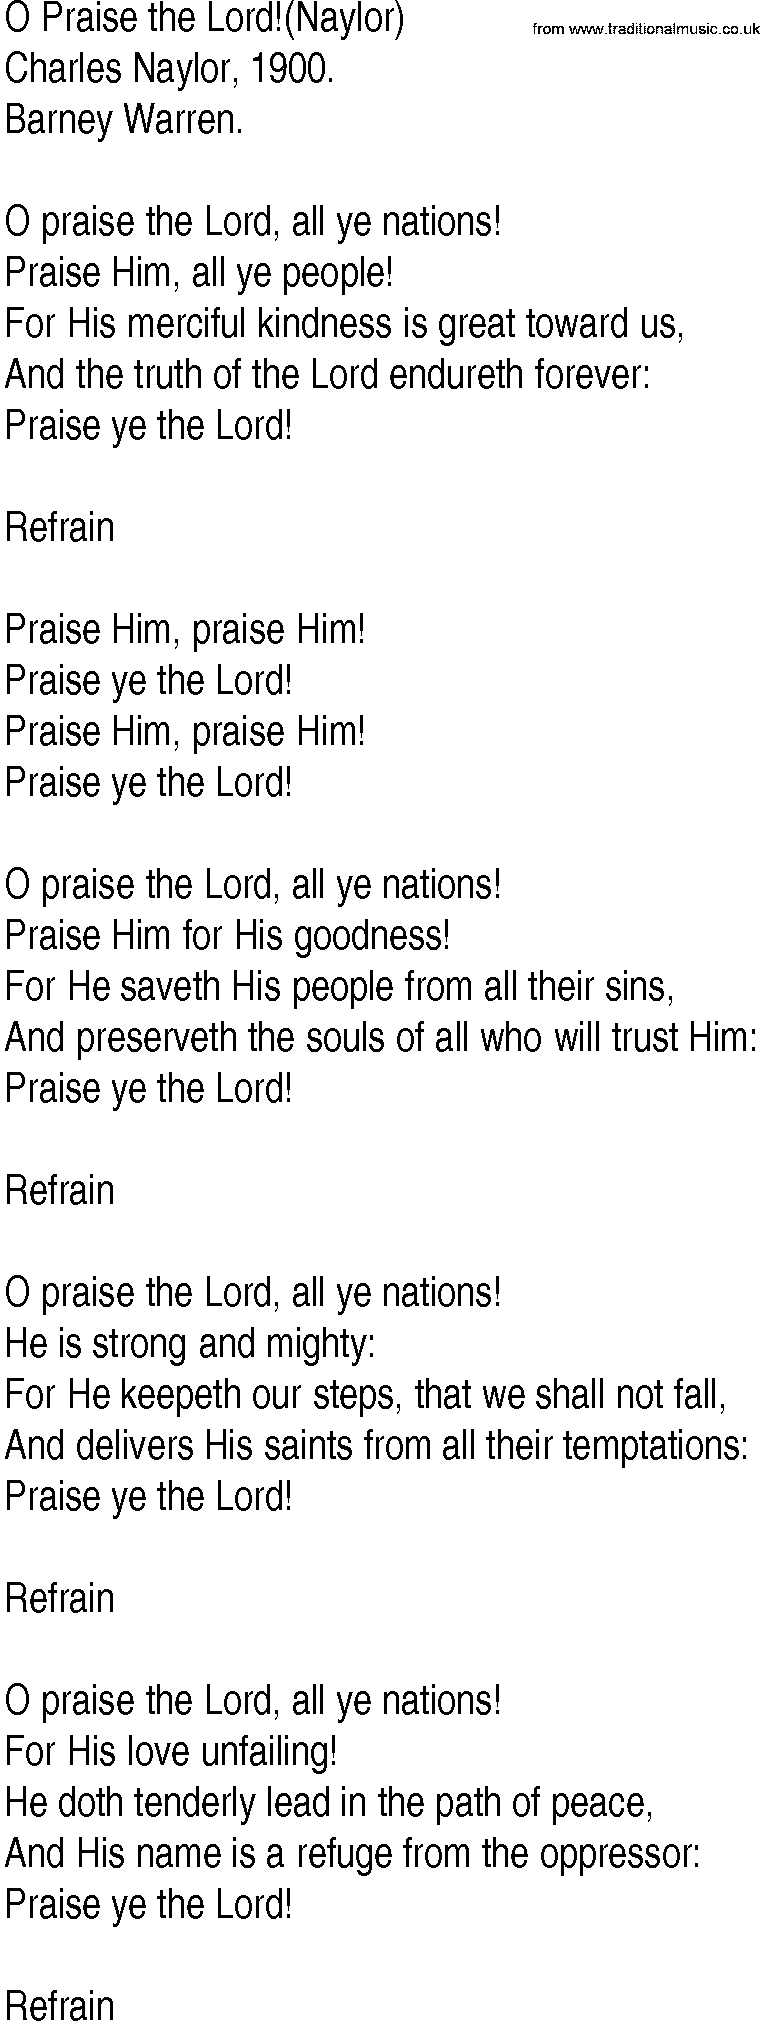 Hymn and Gospel Song: O Praise the Lord!(Naylor) by Charles Naylor lyrics